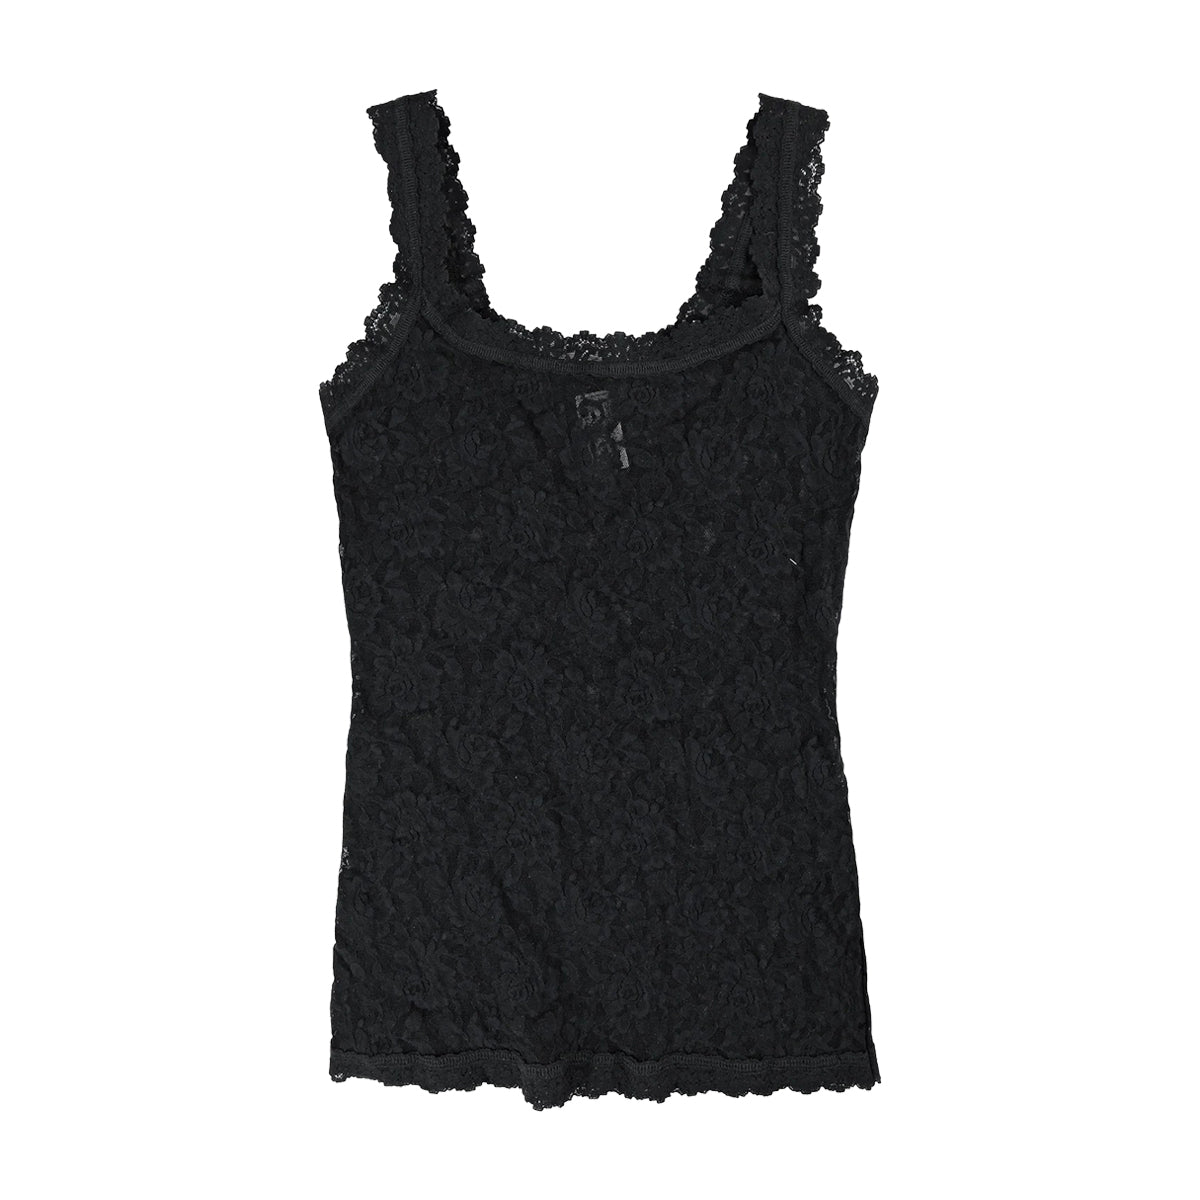 Singlet Camisole with Cutaway Lace (Black or White) – Not Just Bras